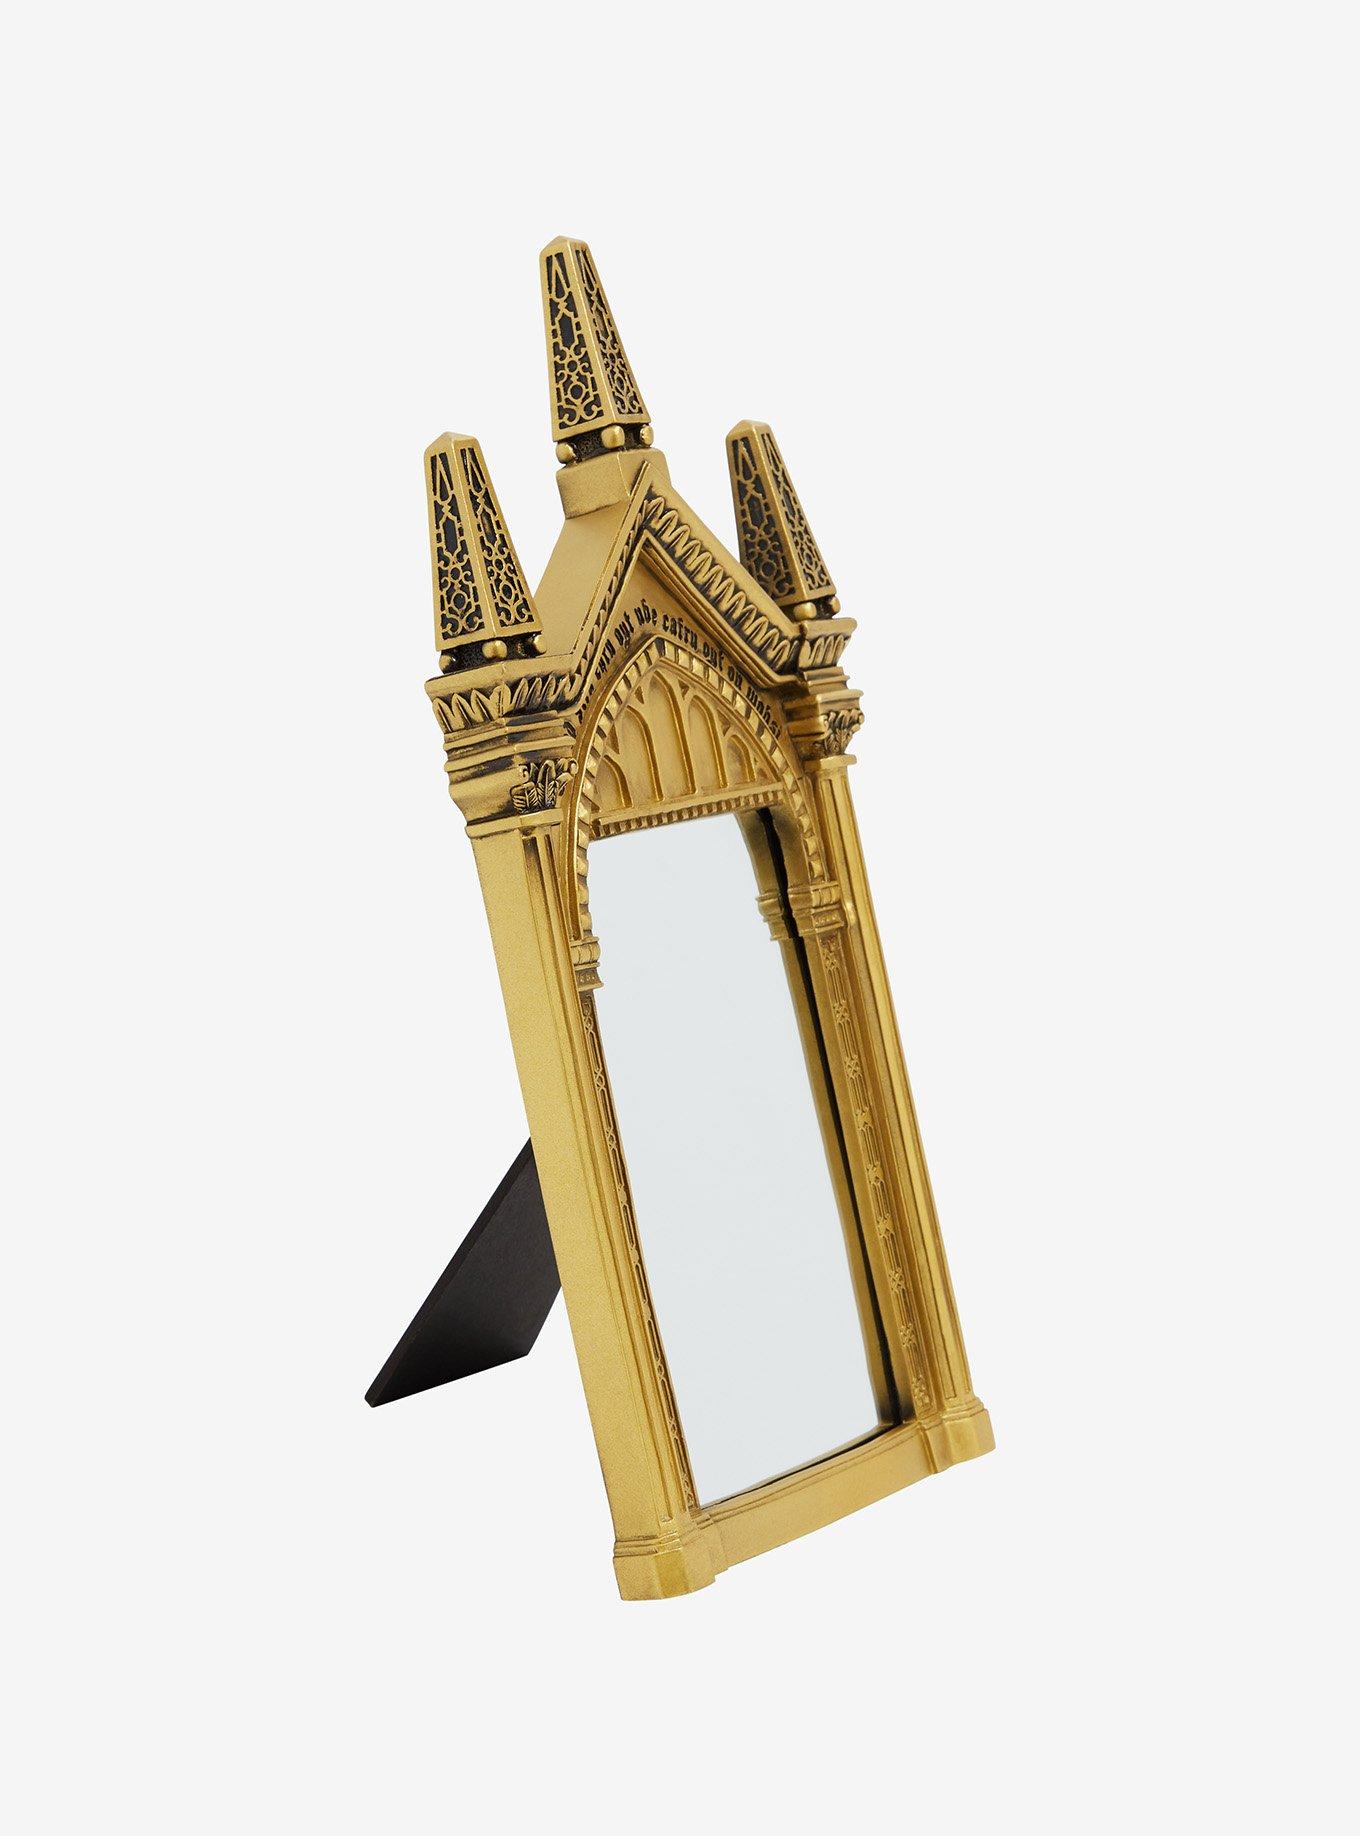 Target Is Selling the 'Harry Potter' Erised Mirror